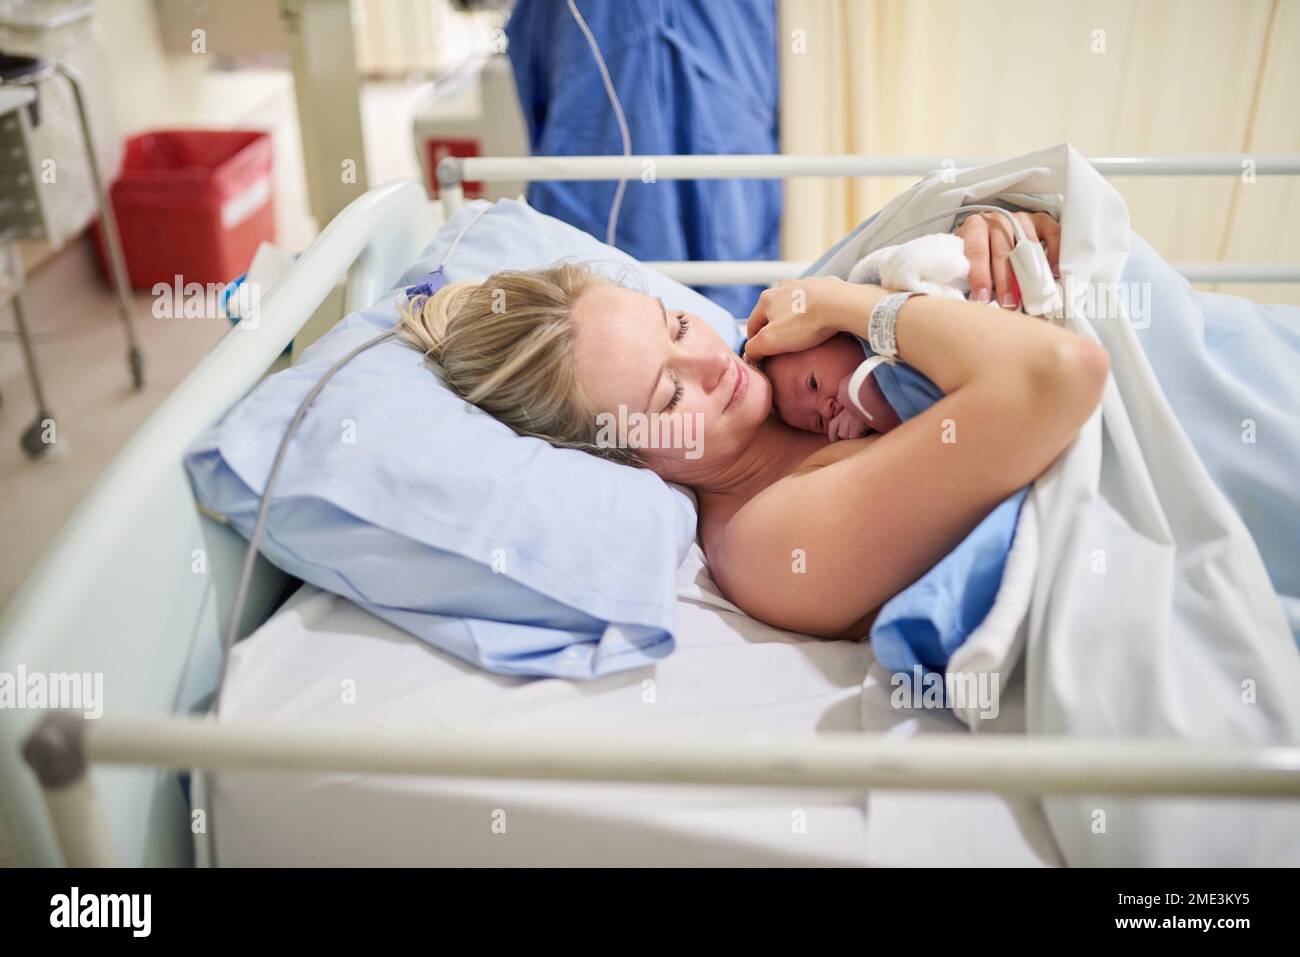 Ill hold you dear to me forever. a beautiful young mother lying in bed with her newly born baby girl in the hospital. Stock Photo